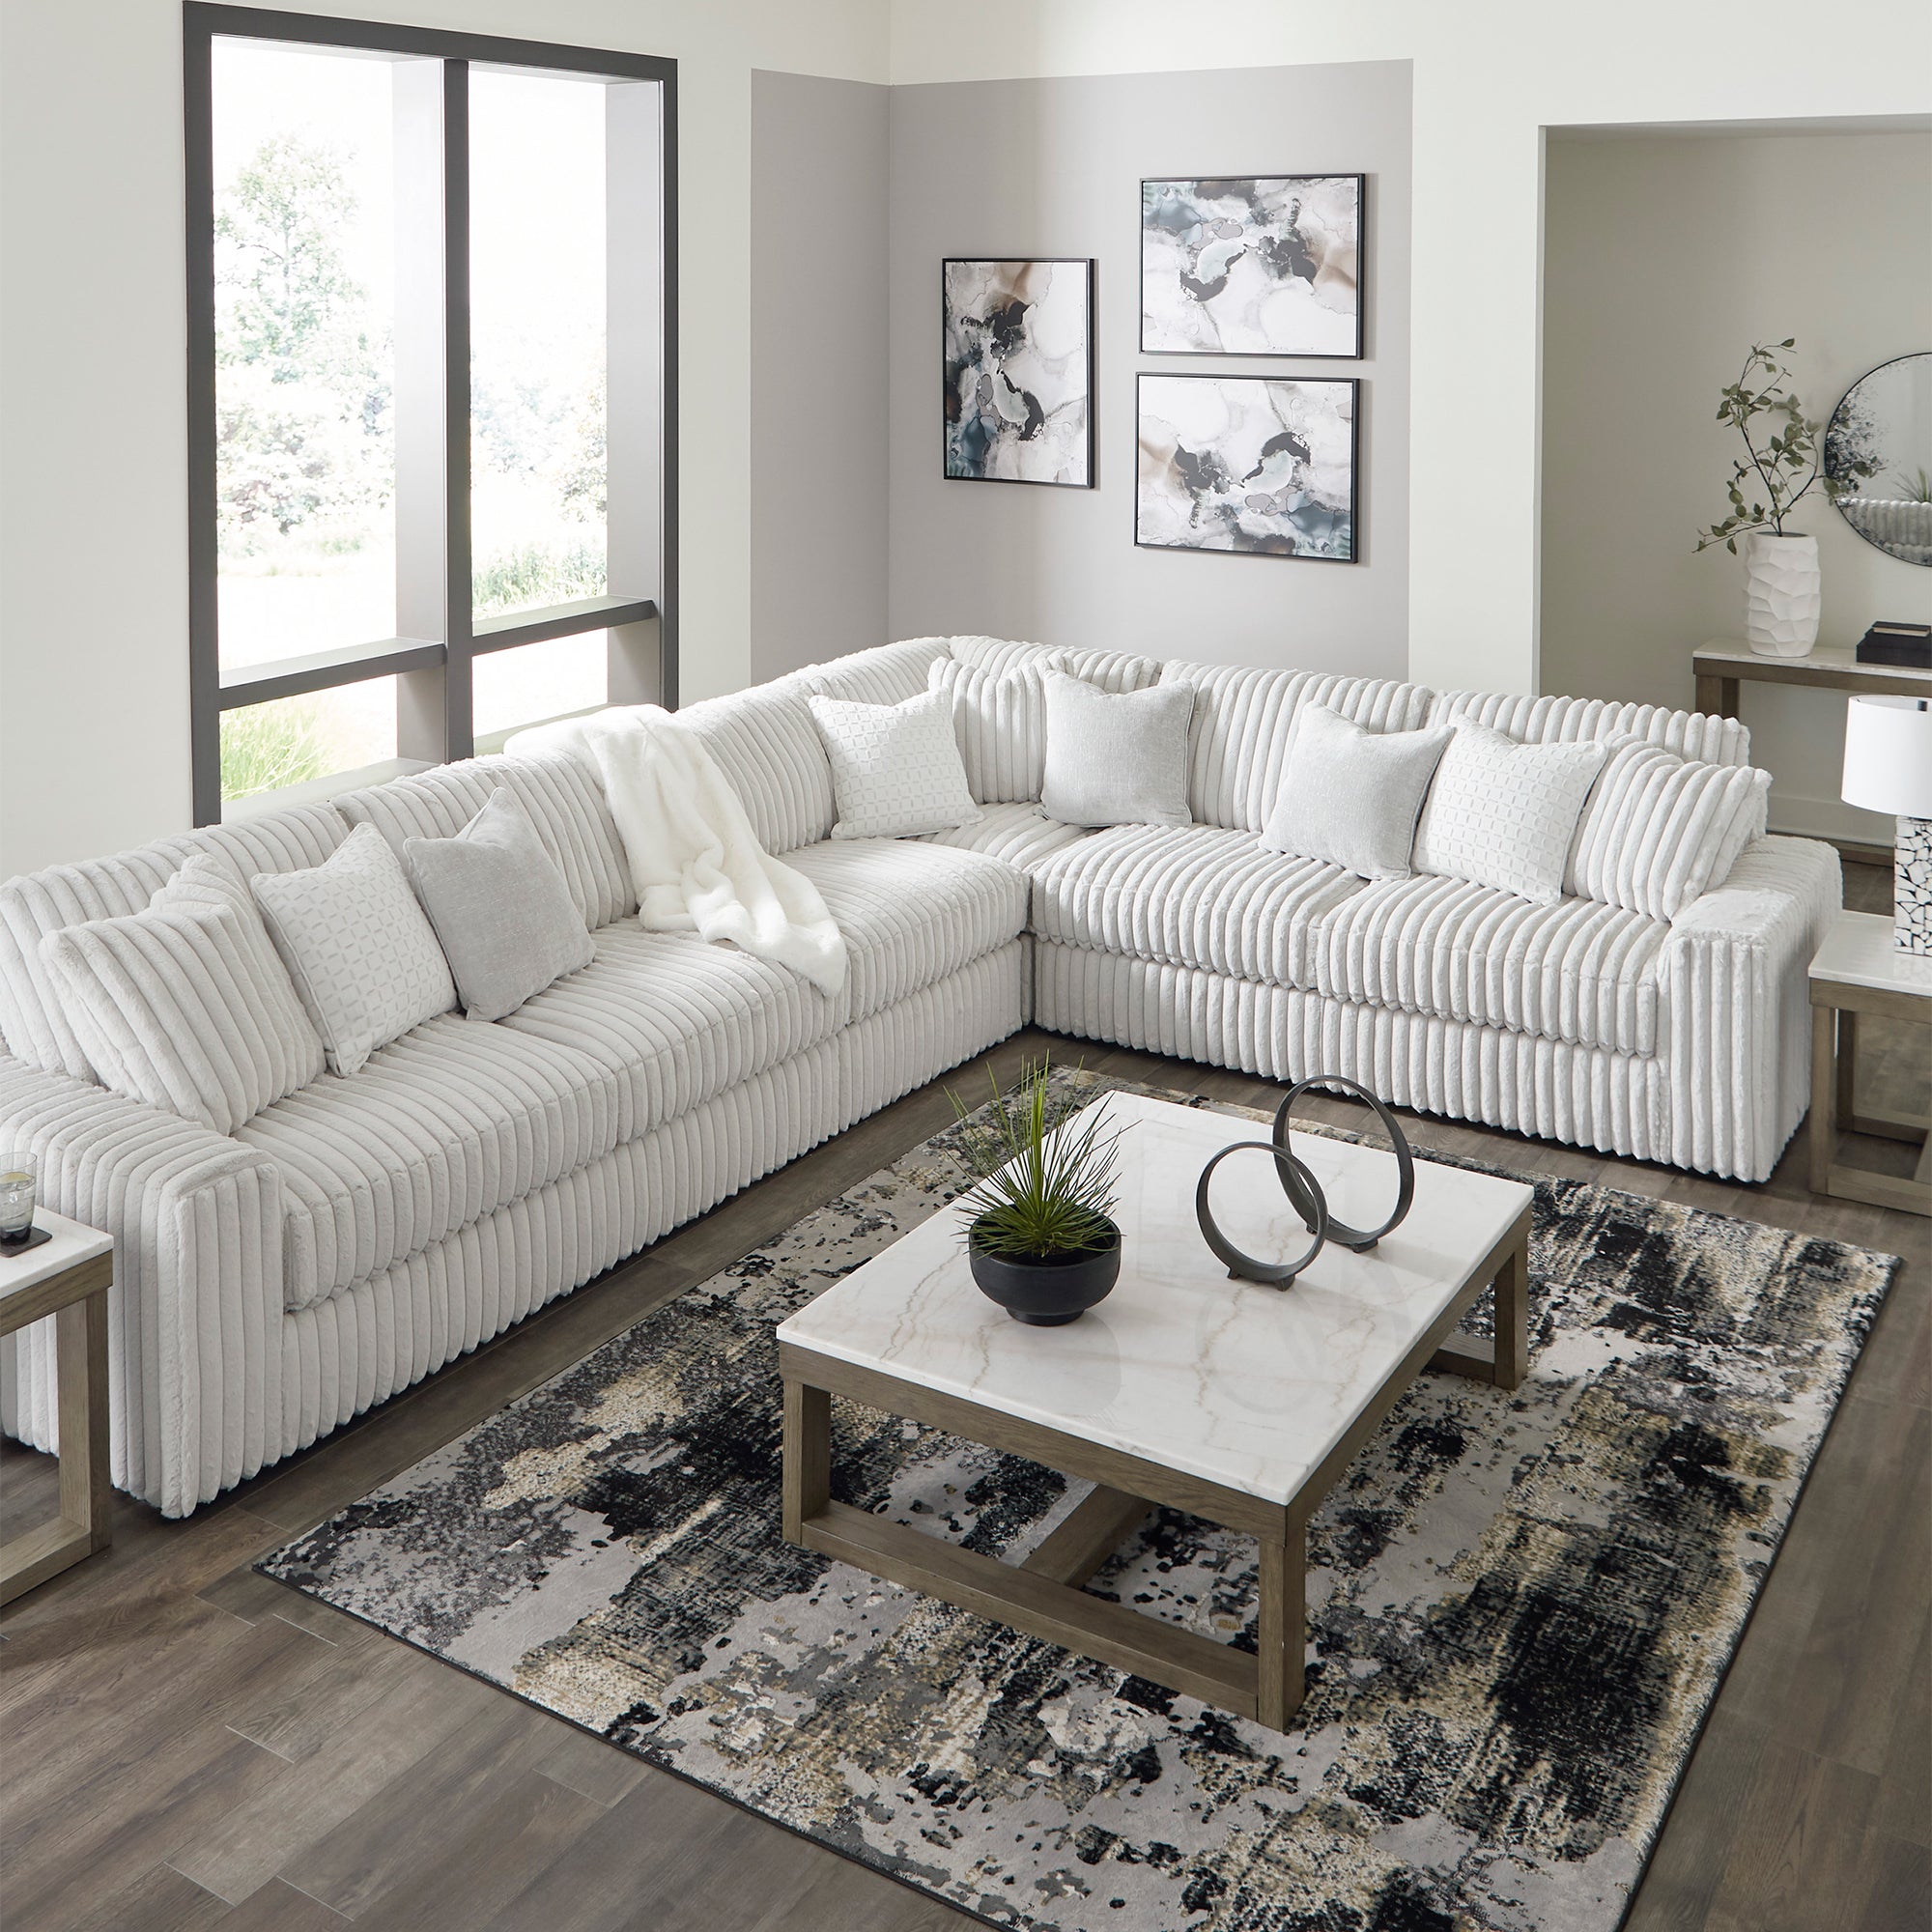 Stupendous Sectional with a unique platform foundation system that resists sagging, ensuring a smooth, even support